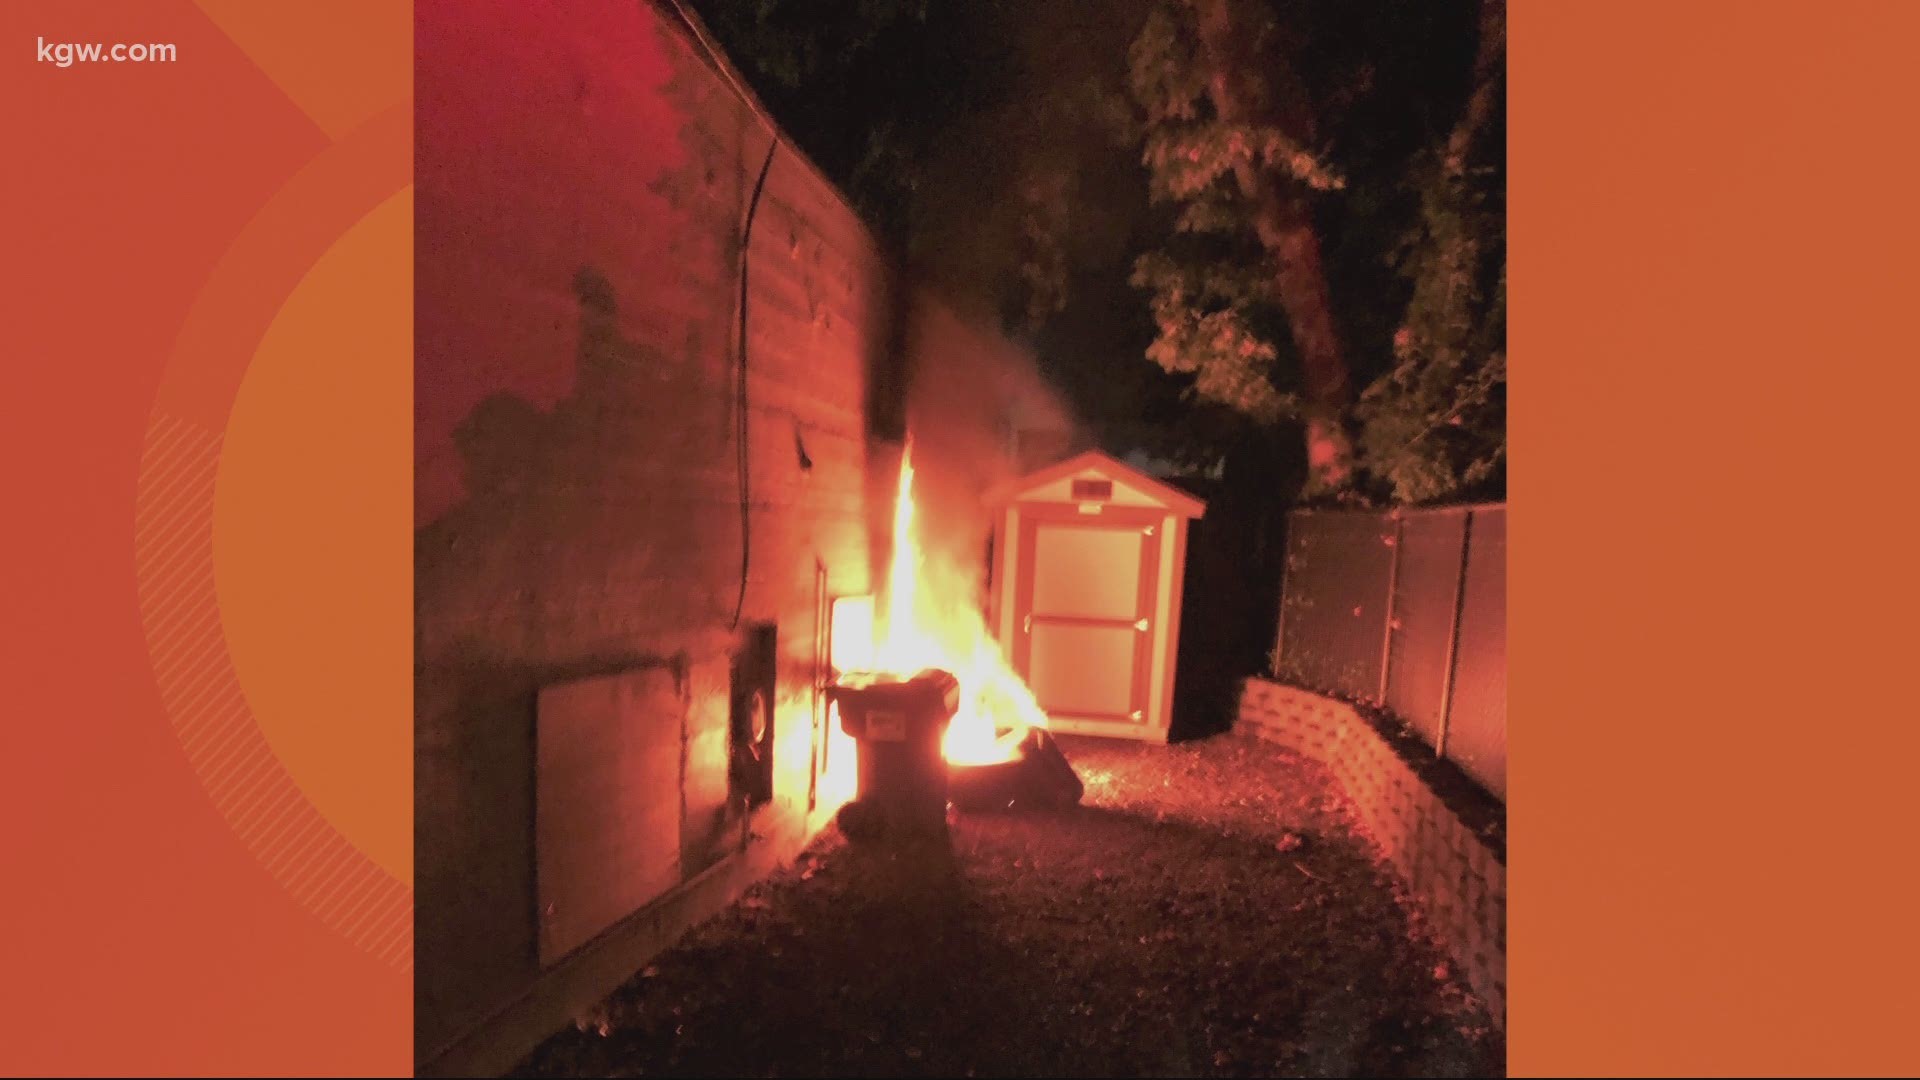 A crowd of about 300 people made their way to Portland Police union headquarters on Monday night and set two fires outside the building.